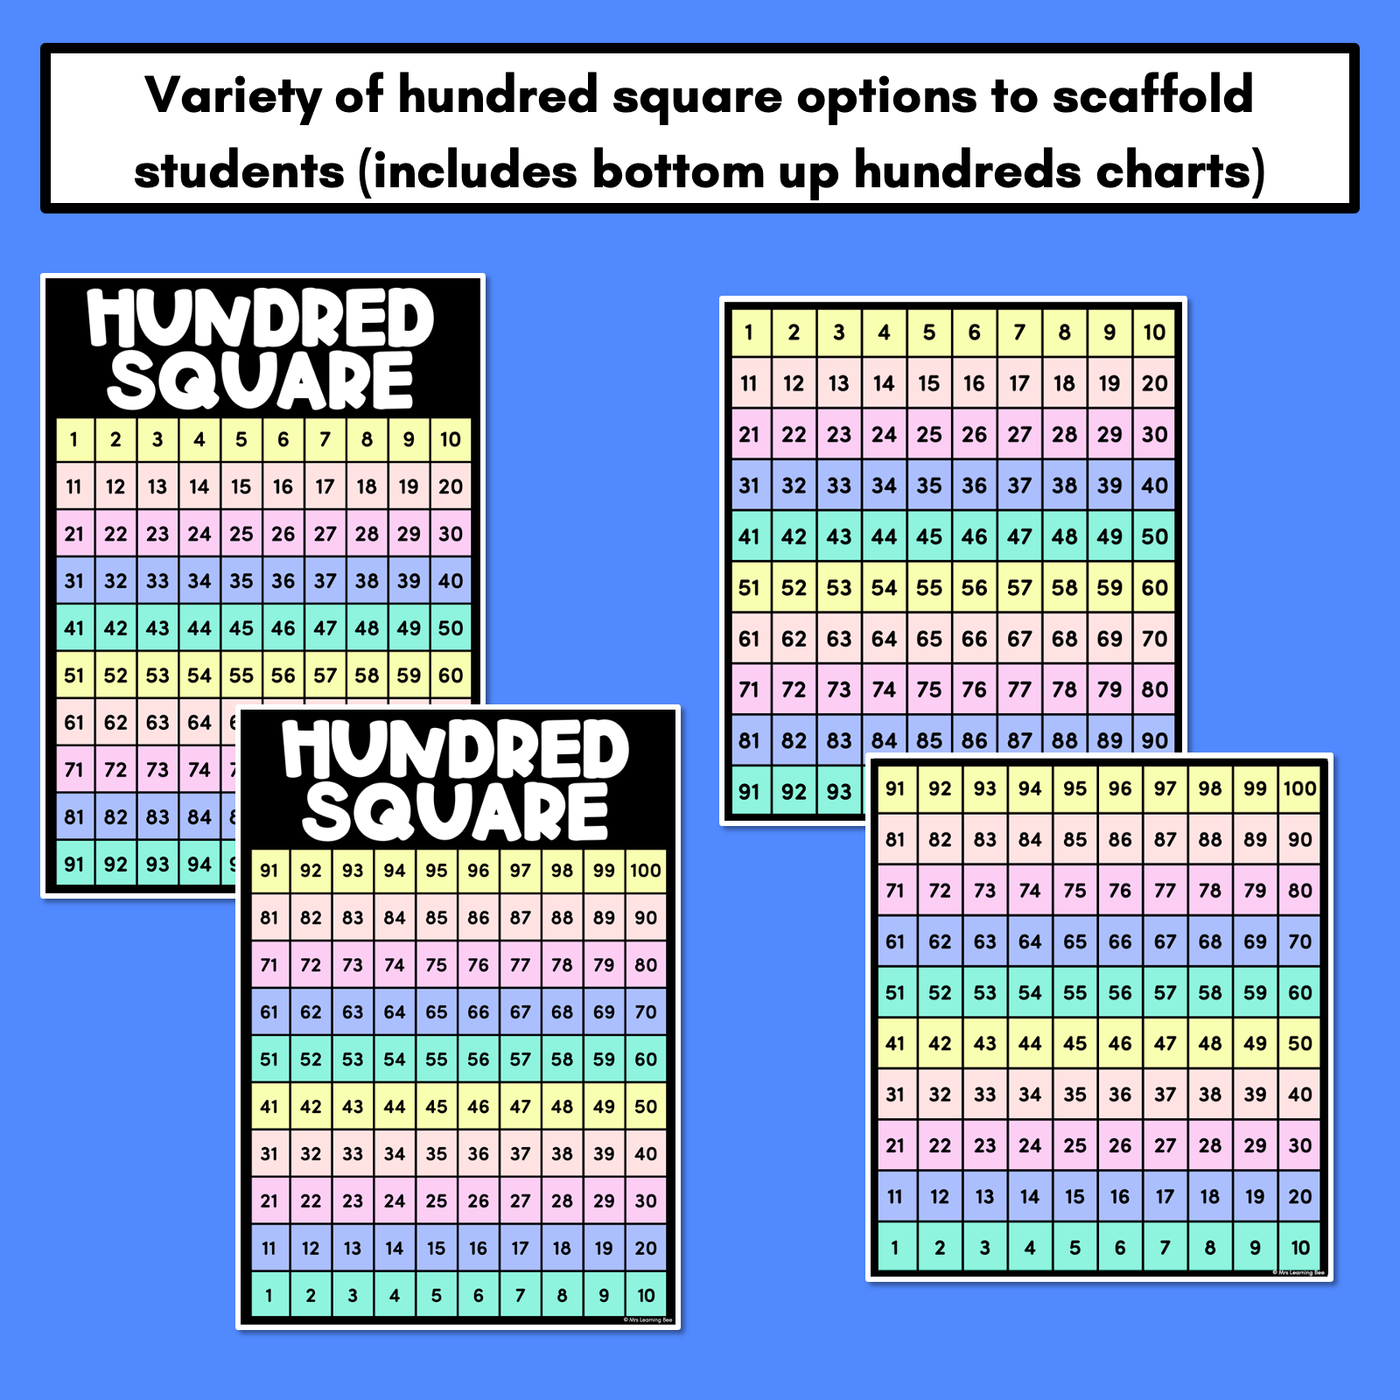 Missing Numbers Before & After, Ten More or Less - Hundred Square Task Cards